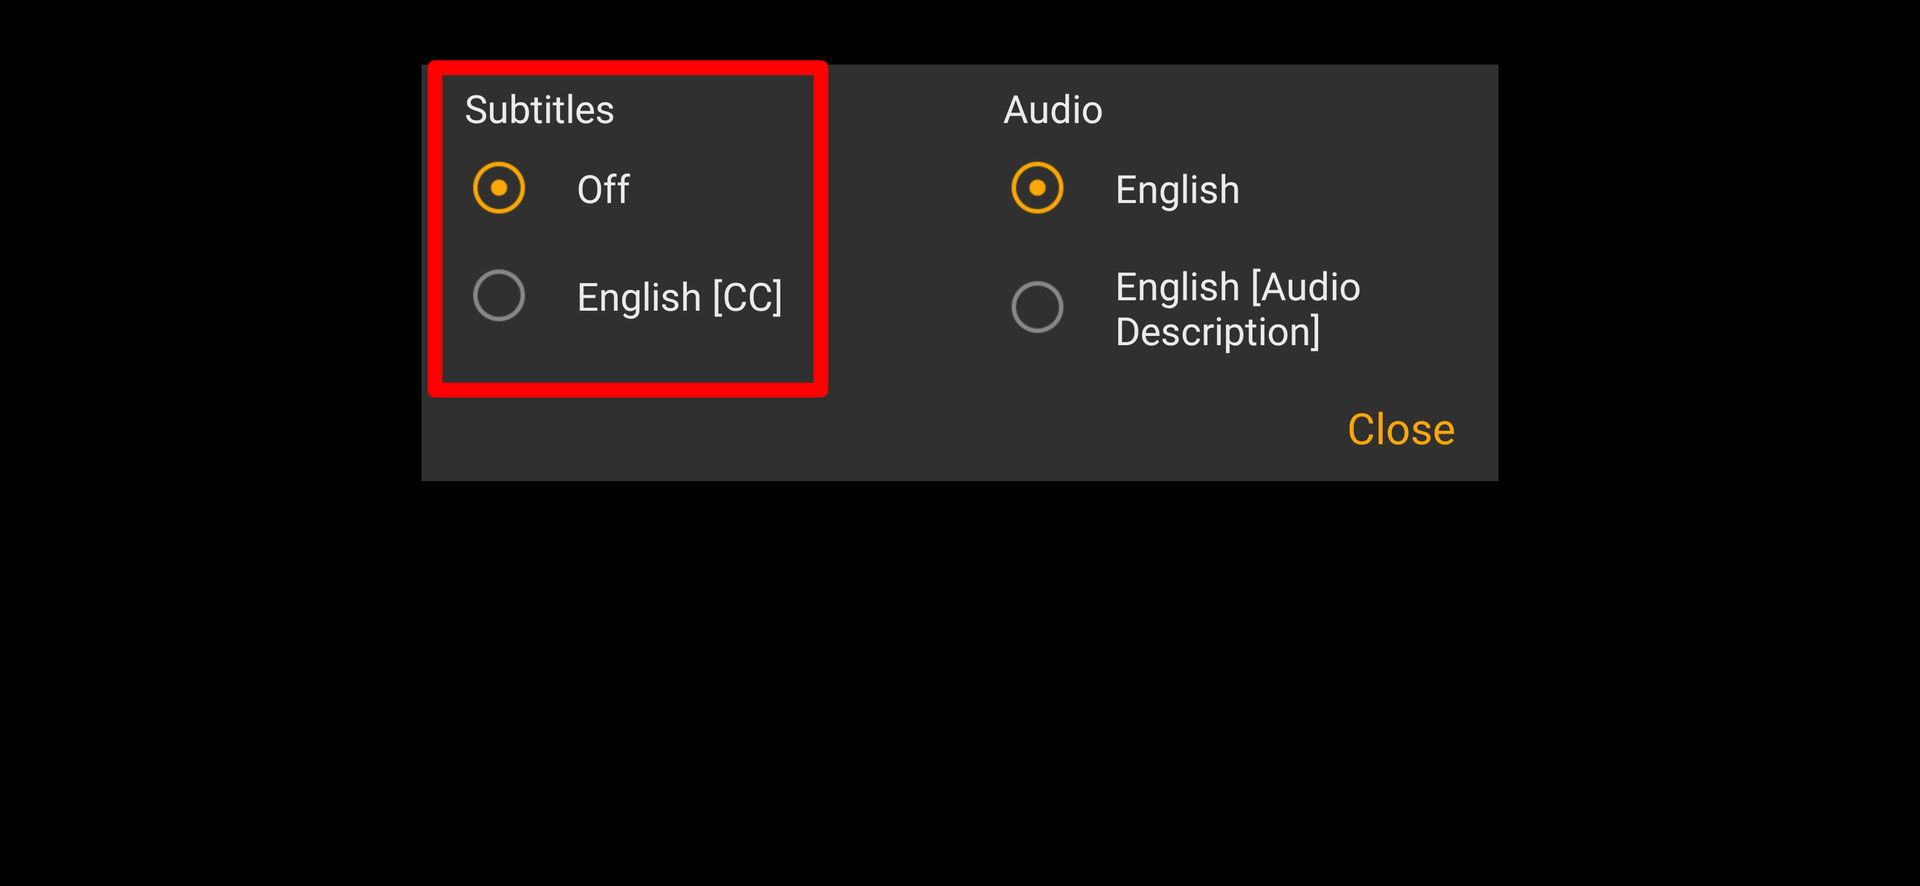 How To Change Amazon Prime Video Subtitles And Language